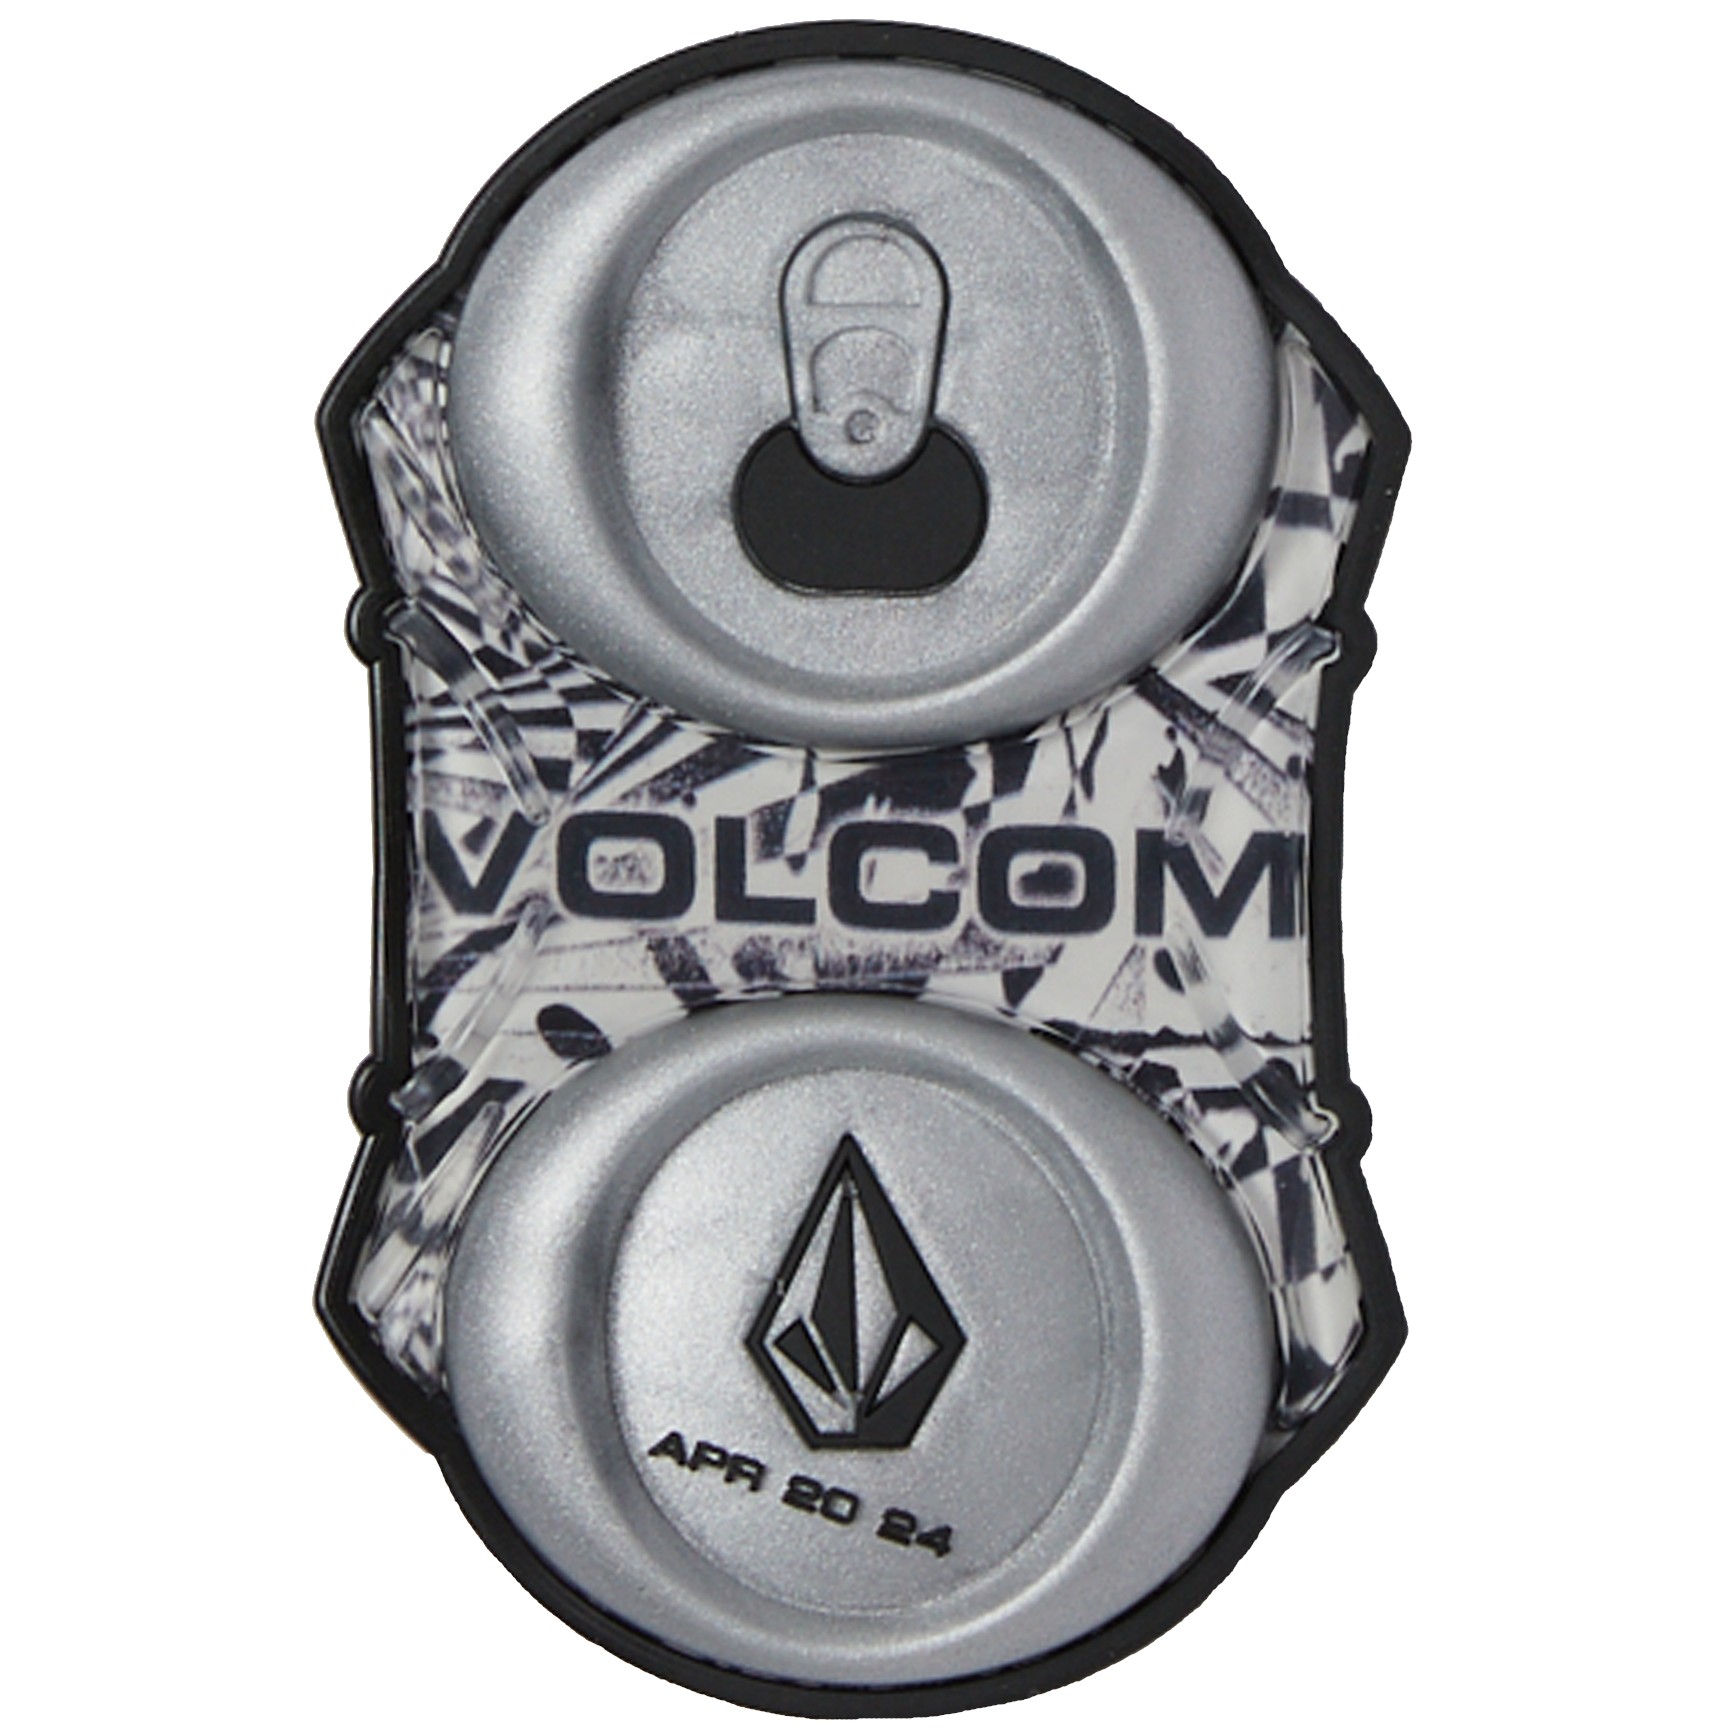 Volcom Crushed Can Snowboard Stomp Pad